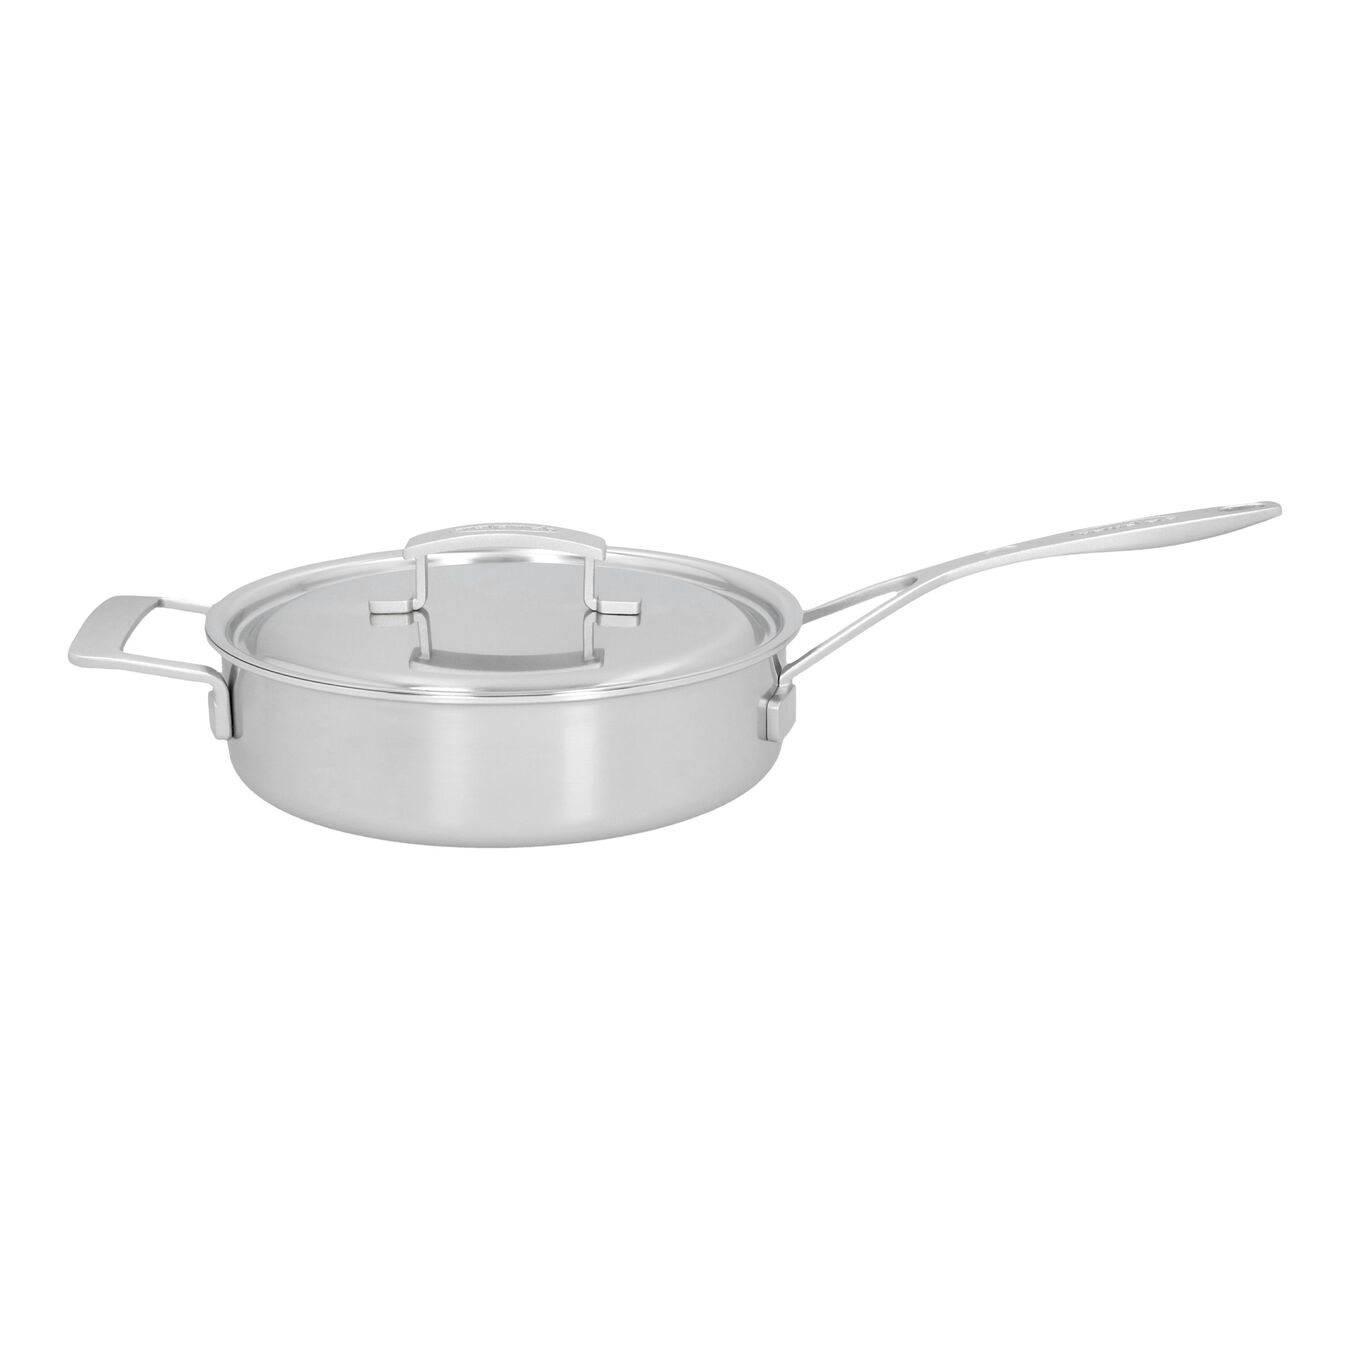 Zwilling Spirit 5-qt Stainless Steel Saute Pan